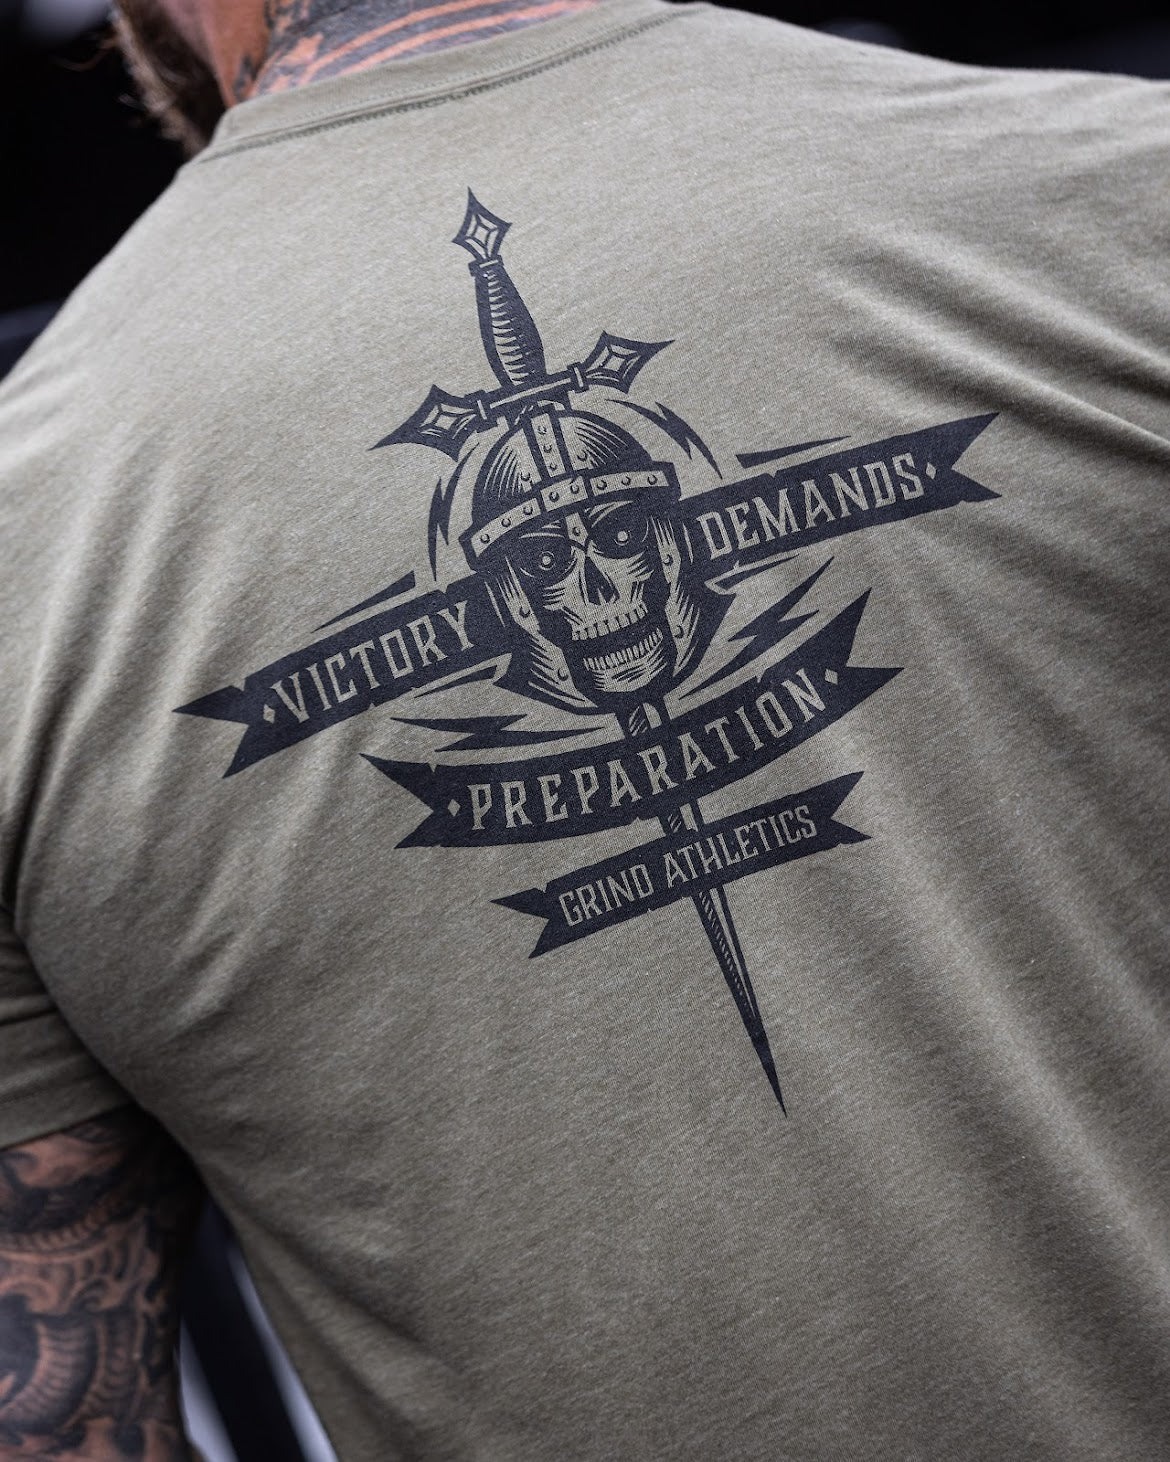 The Grind Athletics S / Military Green Victory Demands Preparation